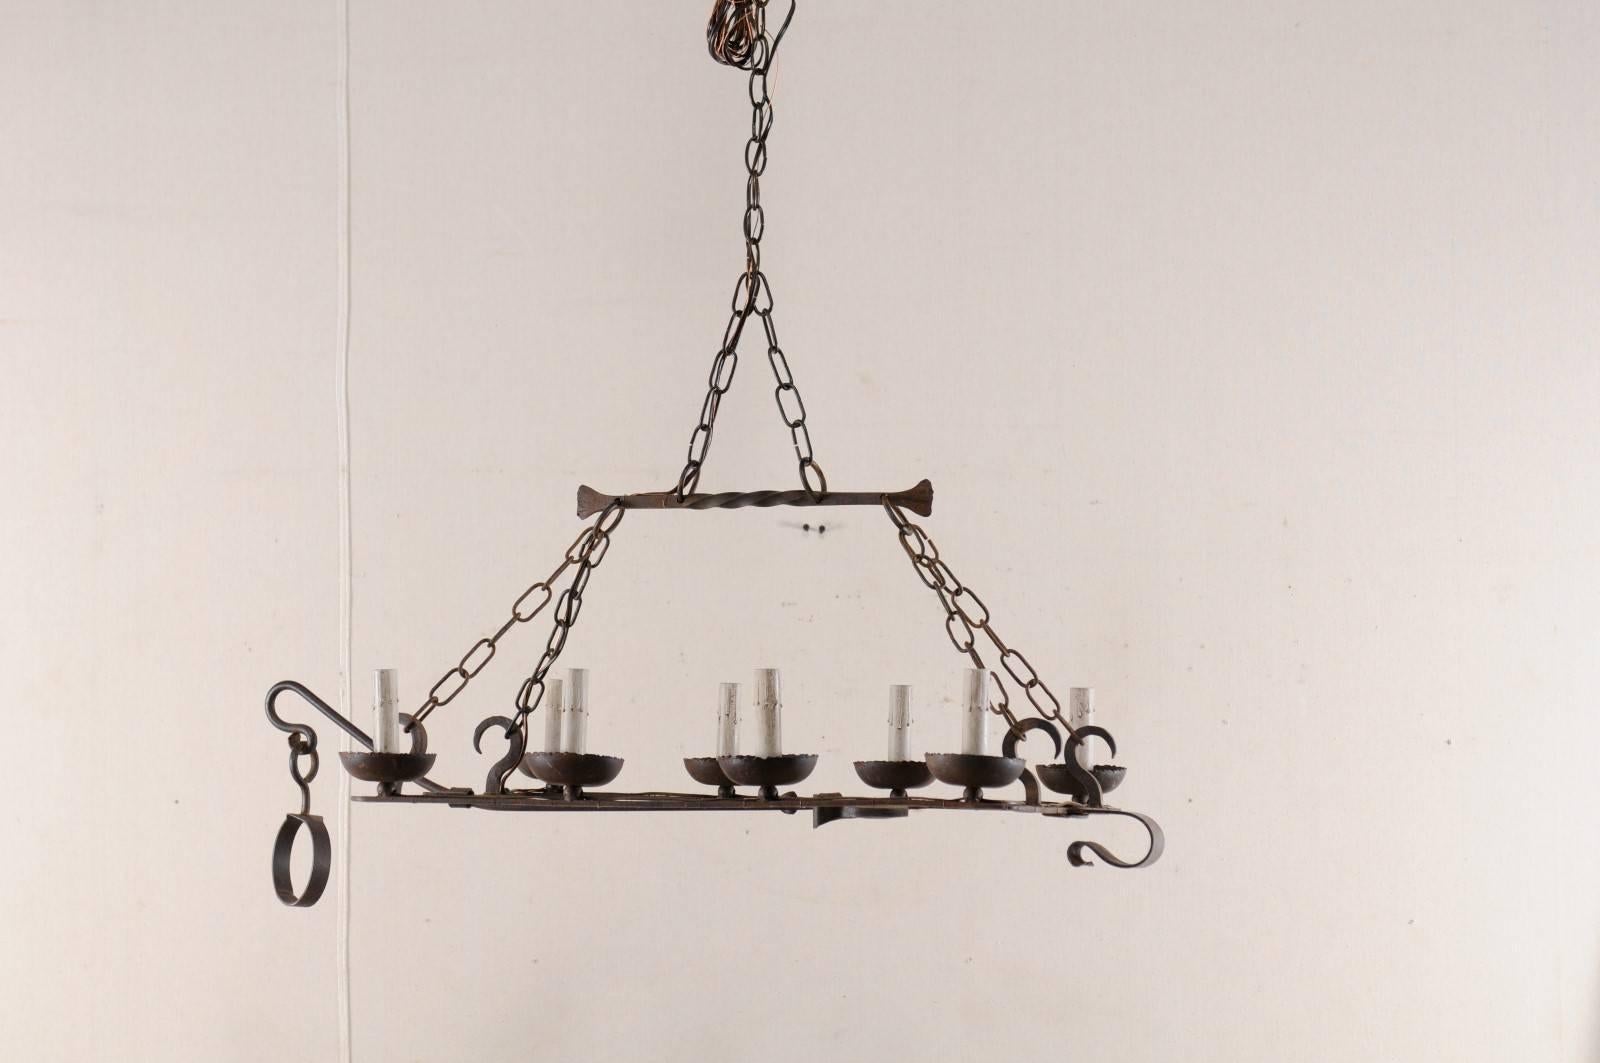 Rustic French Mid-20th Century Eight-Light Forged Iron Chandelier Made from a Spit-Jack